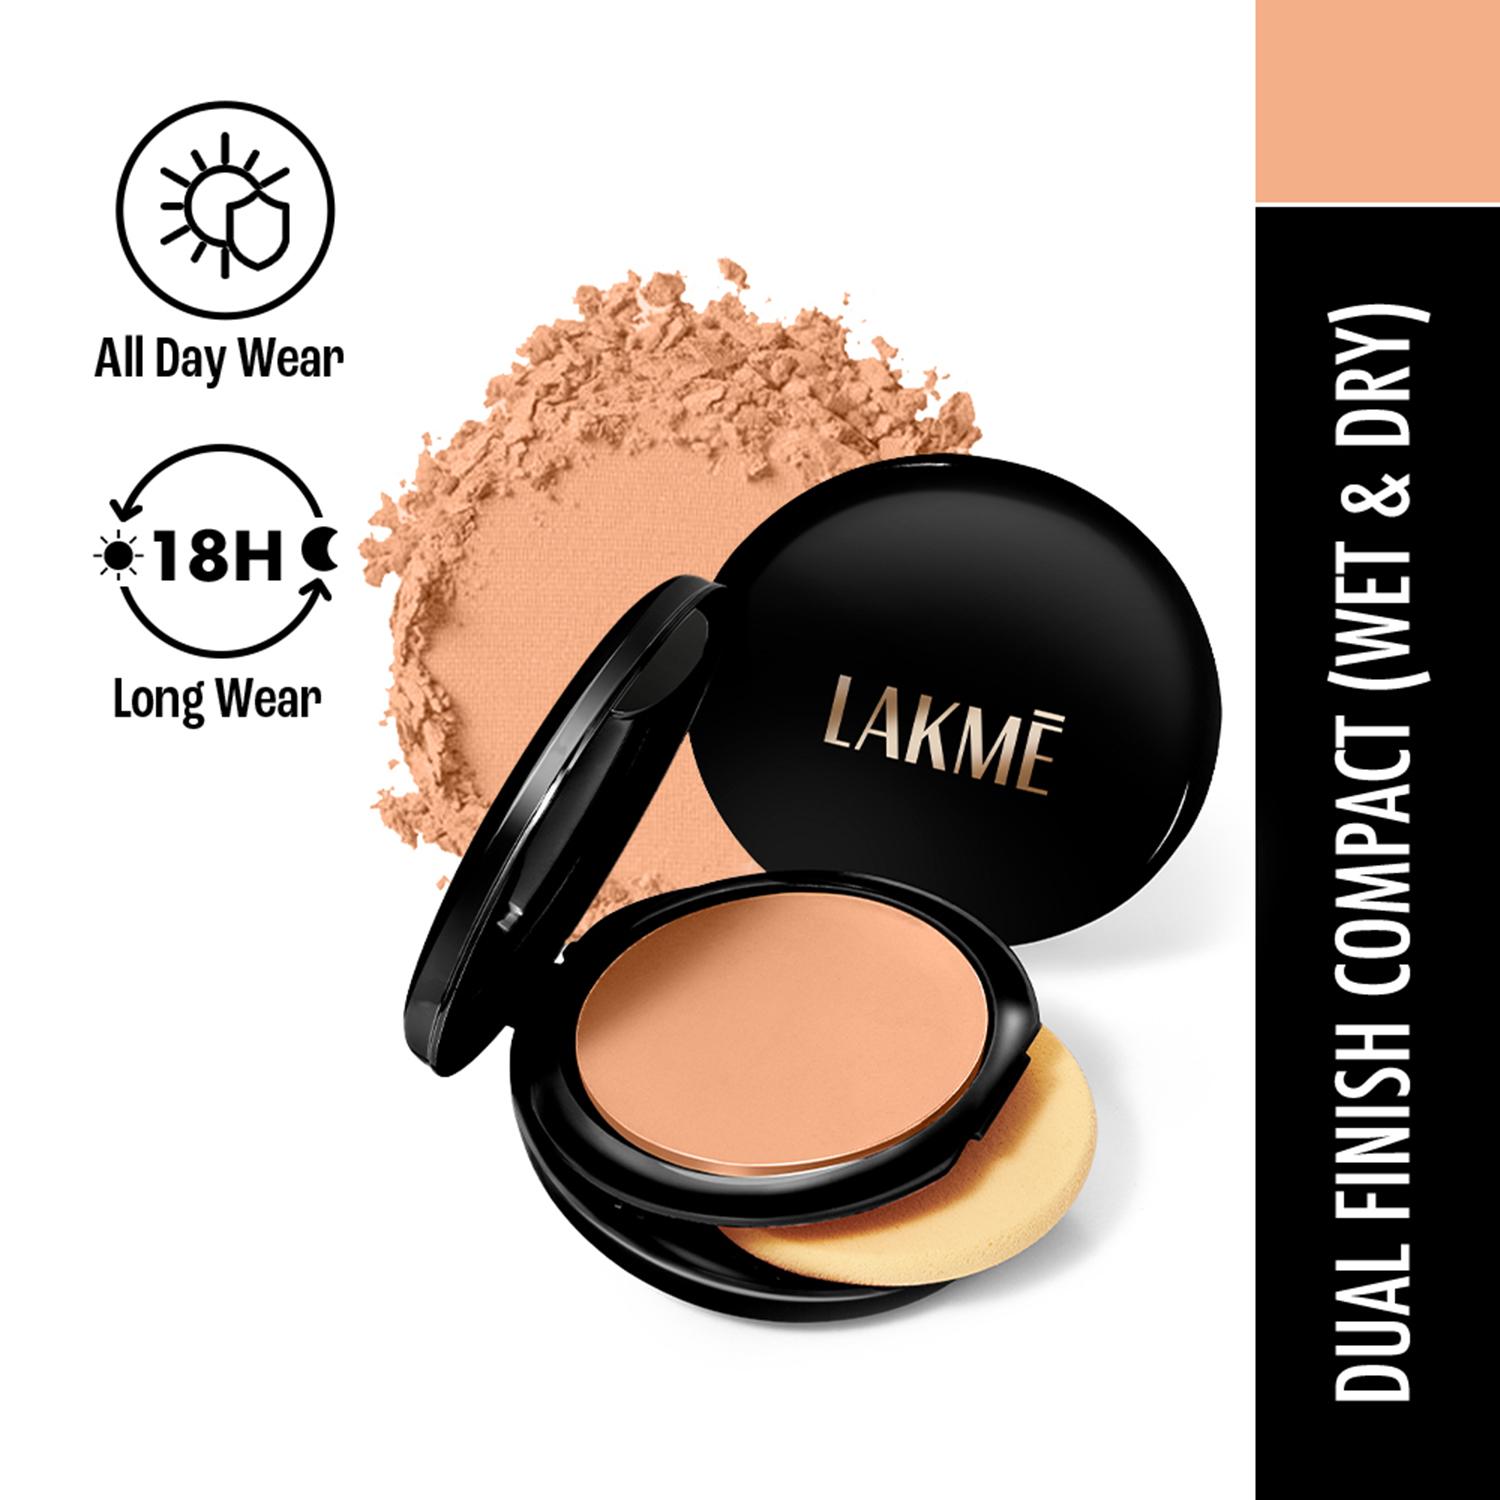 Lakme | Lakme Xtraordin-airy Compact 2 In 1 Compact + Foundation Lightweight SPF17 Rose Fair (9 g)